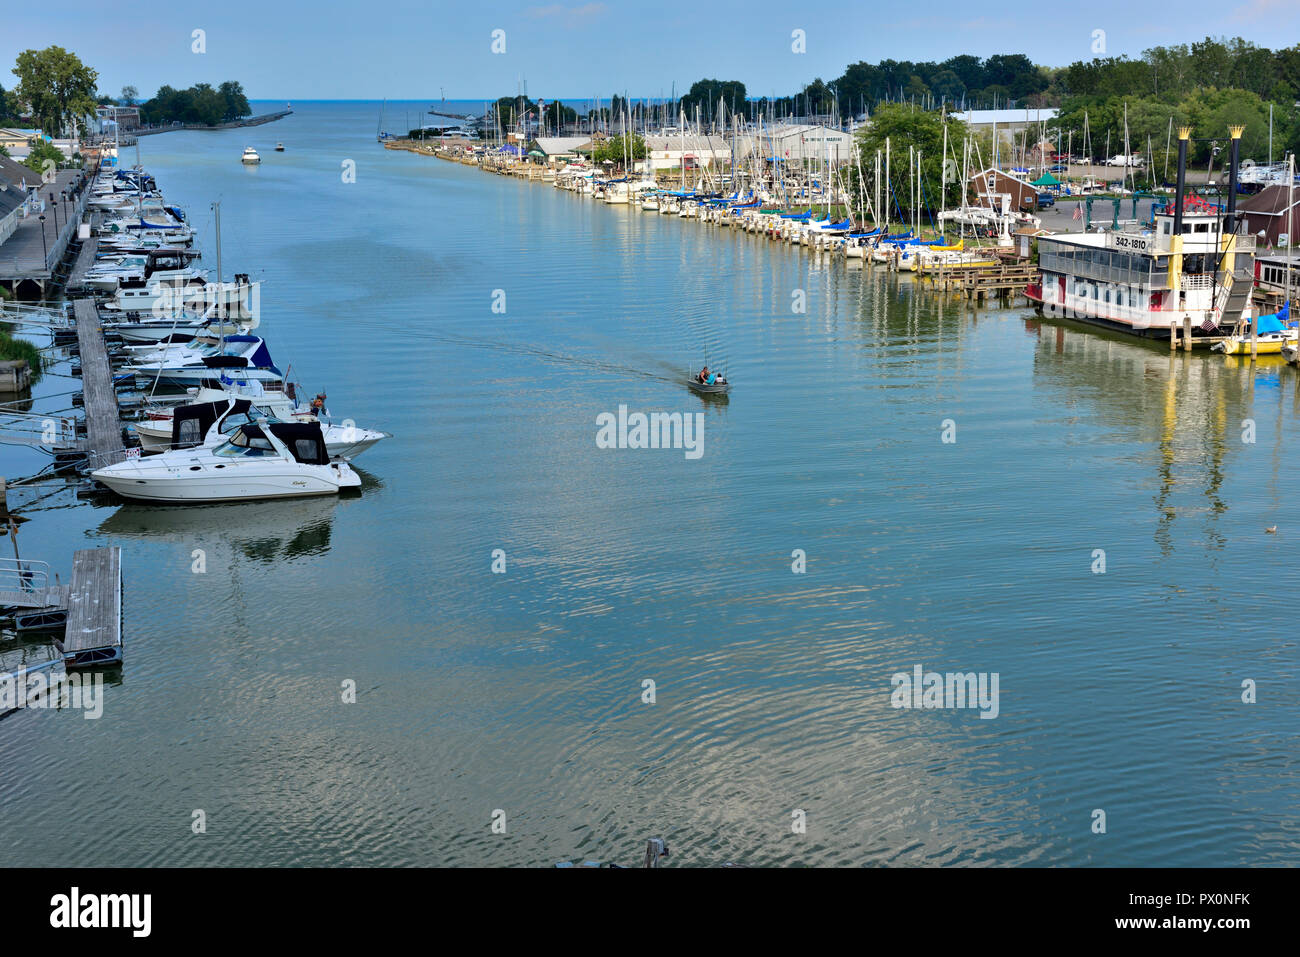 Genesee River Rochester Harbor And Yacht Clubs Near Opening Into Lake Ontario Upstate New York